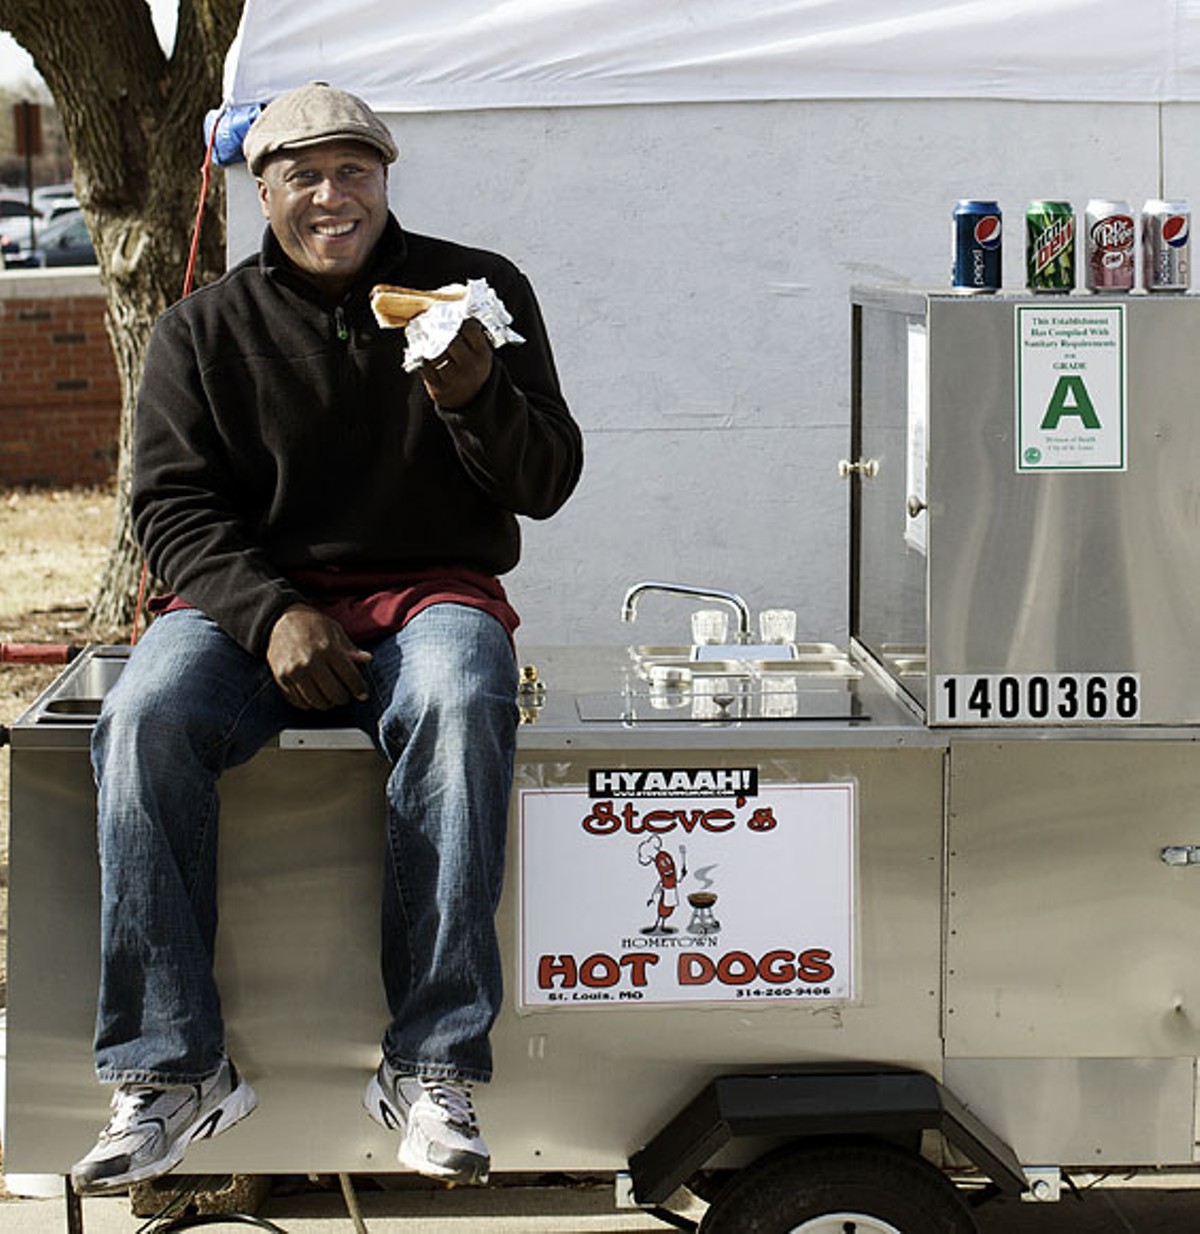 Murphy Lee promotes a healthy-cooking show, while Steve Ewing finds success with a hot-dog cart